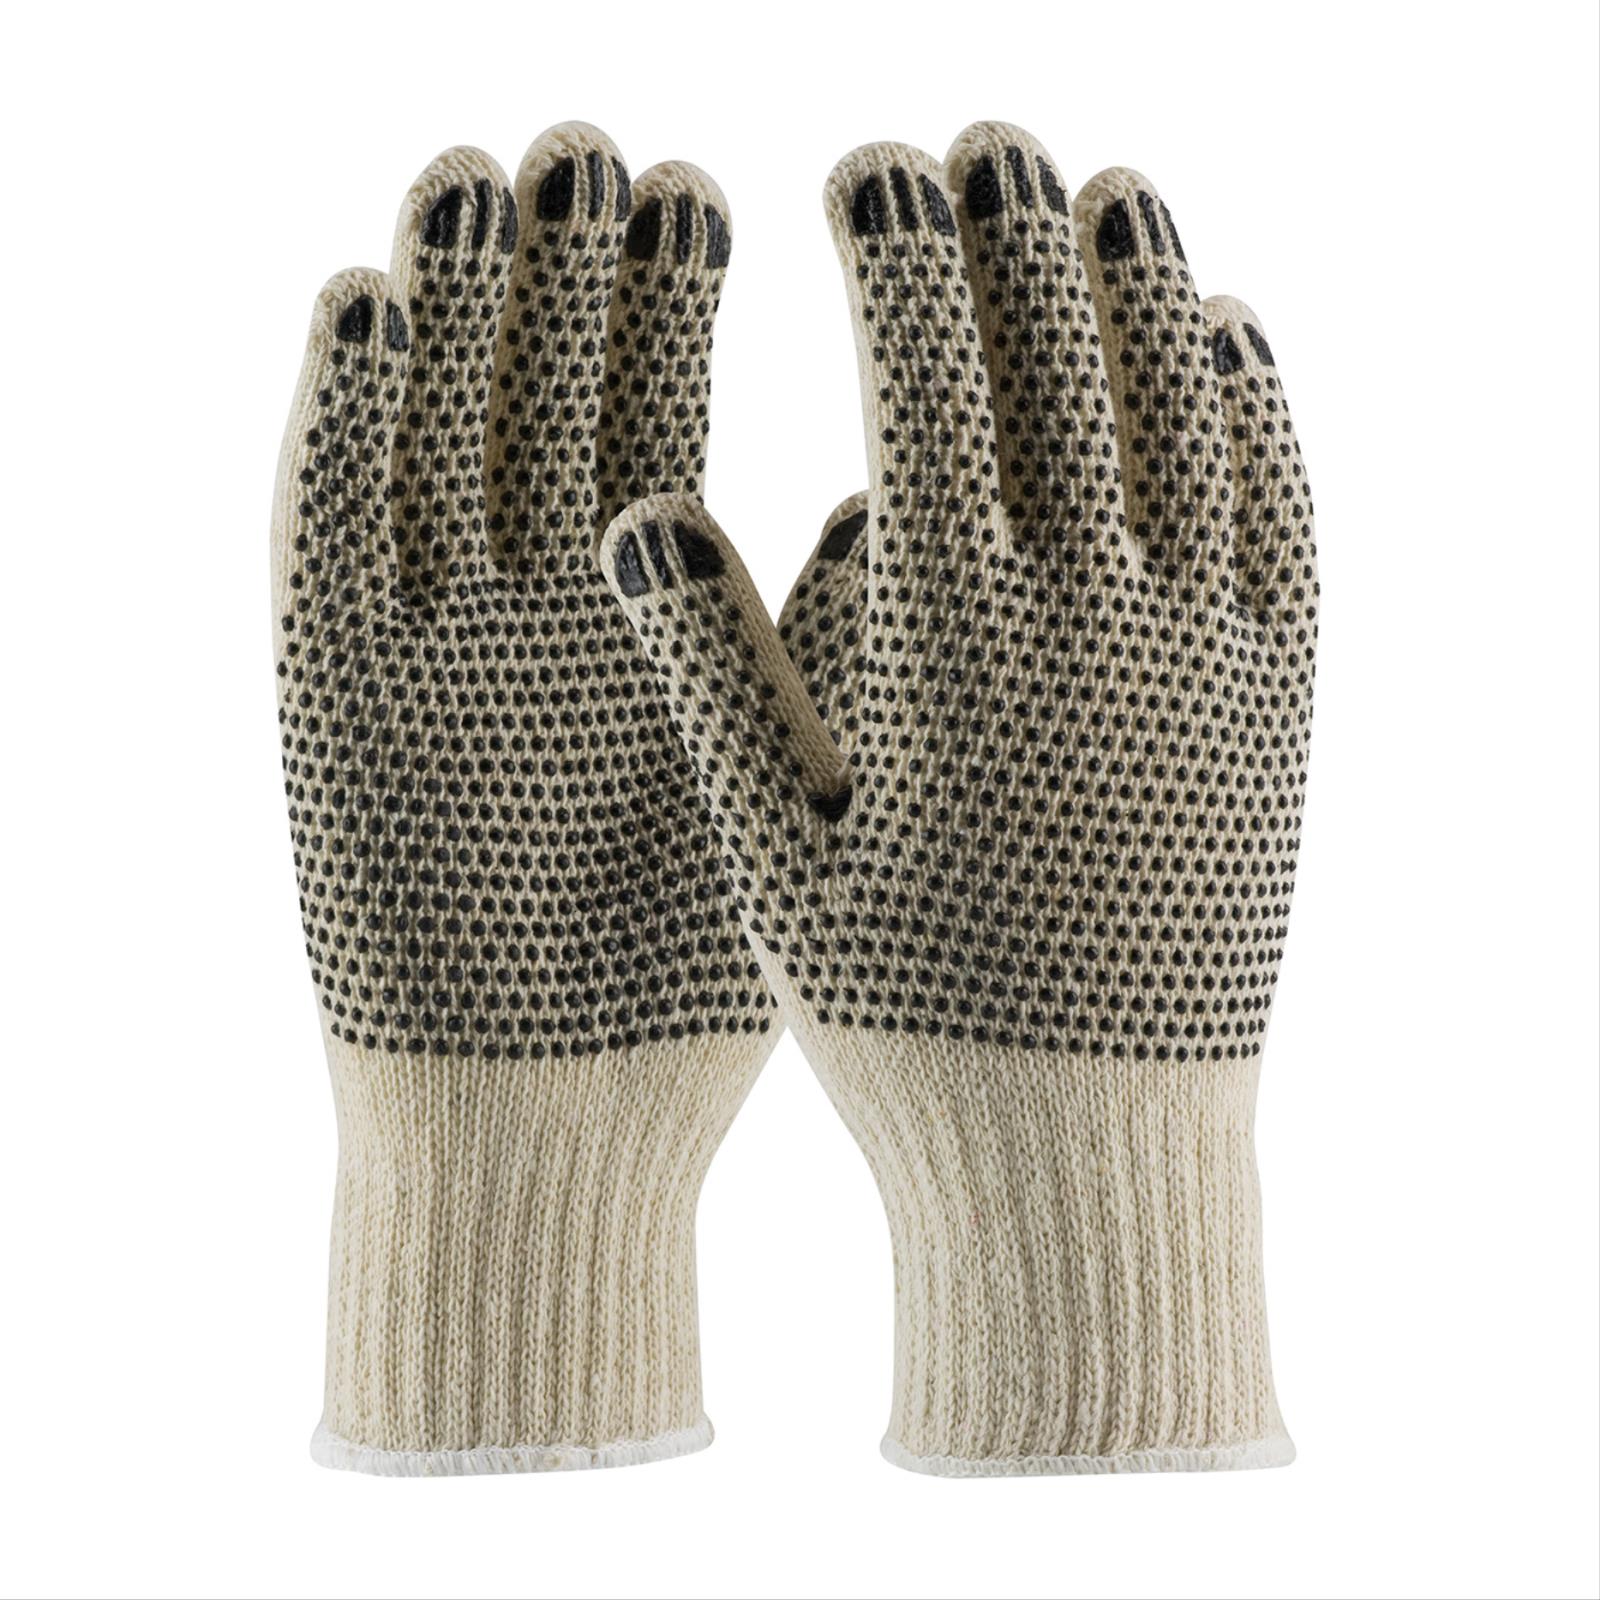 Standard Weight String Gloves, with 2 Sided PVC Dots